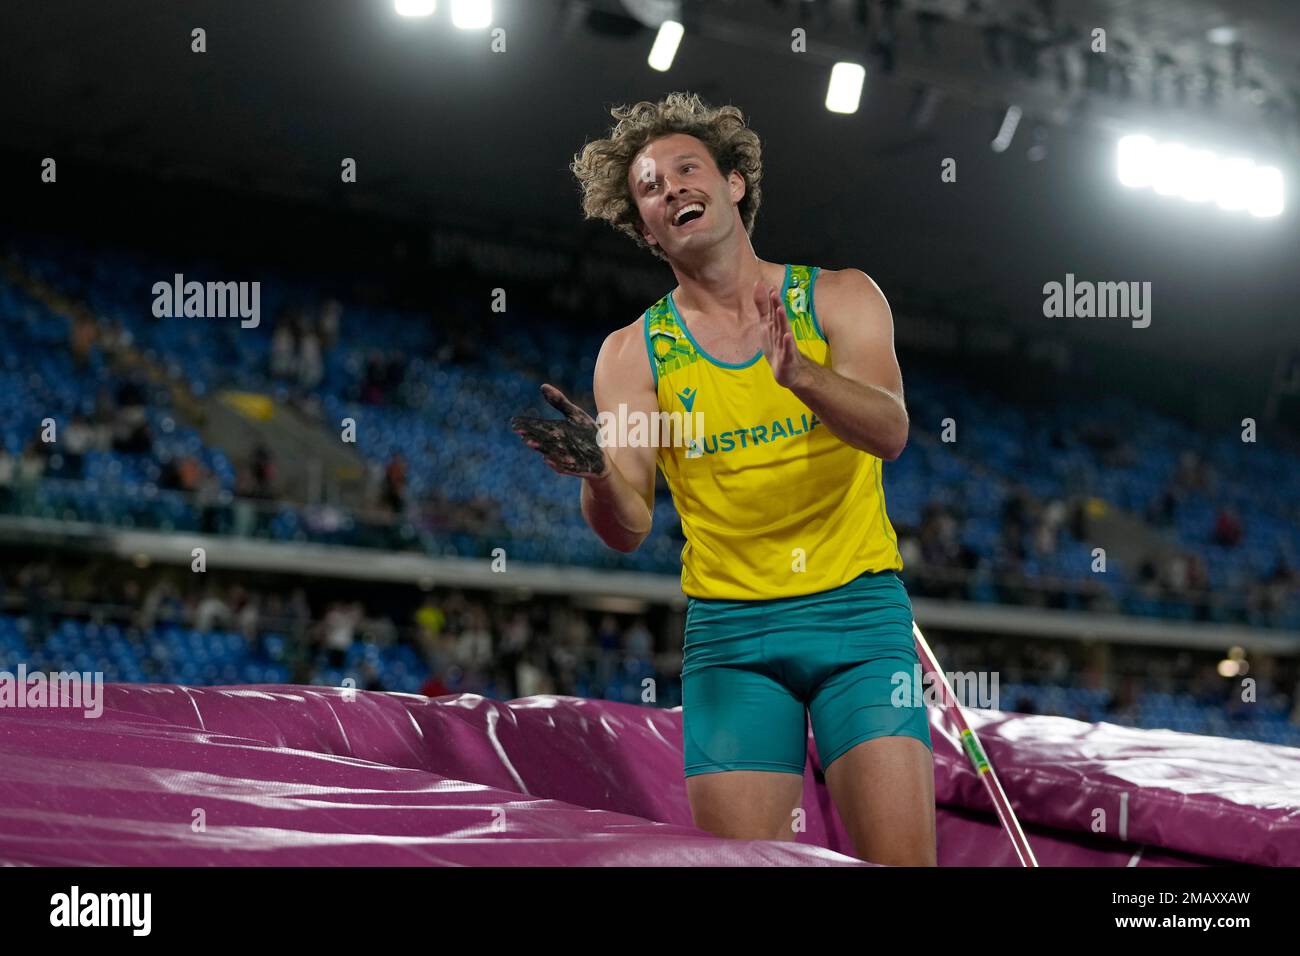 Kurtis Marschall of Australia celebrates after winning the gold medal in  the Men's pole vault final during the athletics competition in the  Alexander Stadium at the Commonwealth Games in Birmingham, England,  Saturday,